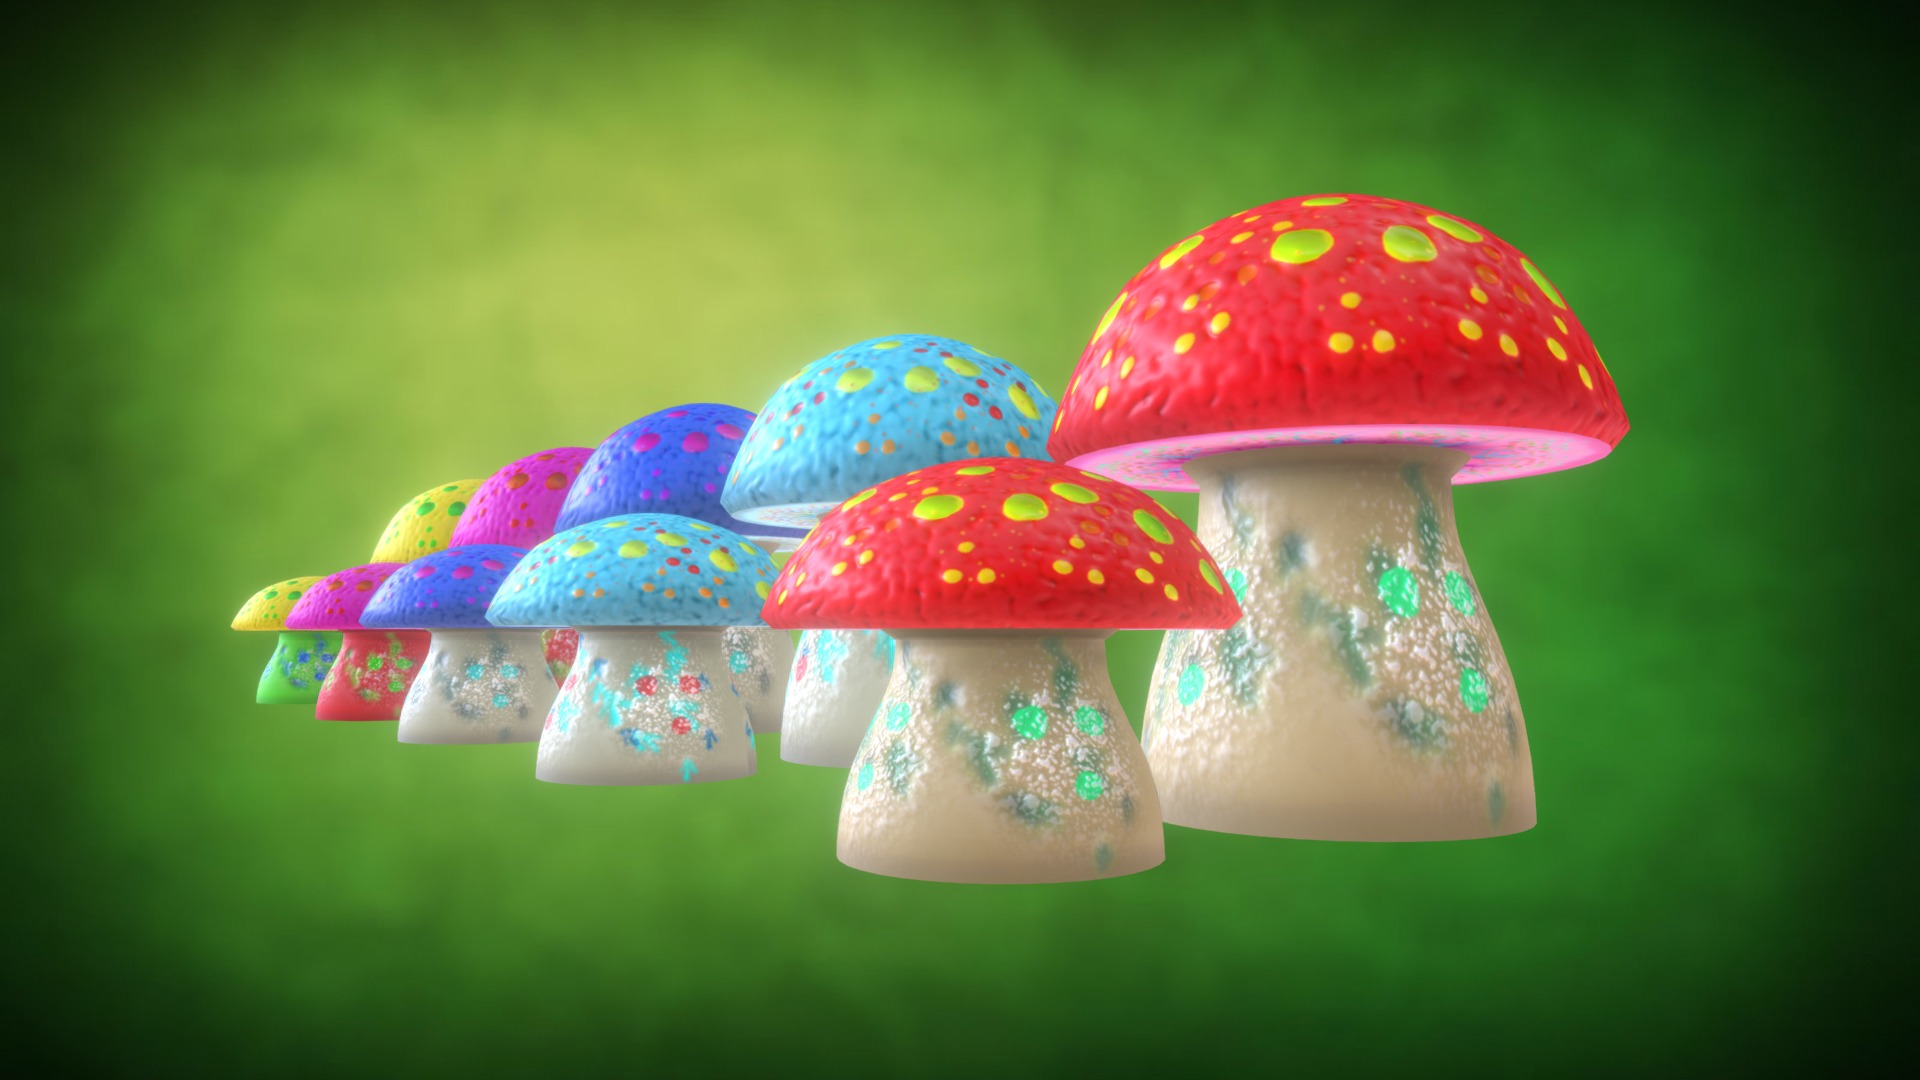 3D model Mushroom (Pack 2) - This is a 3D model of the Mushroom (Pack 2). The 3D model is about a group of colorful cupcakes.